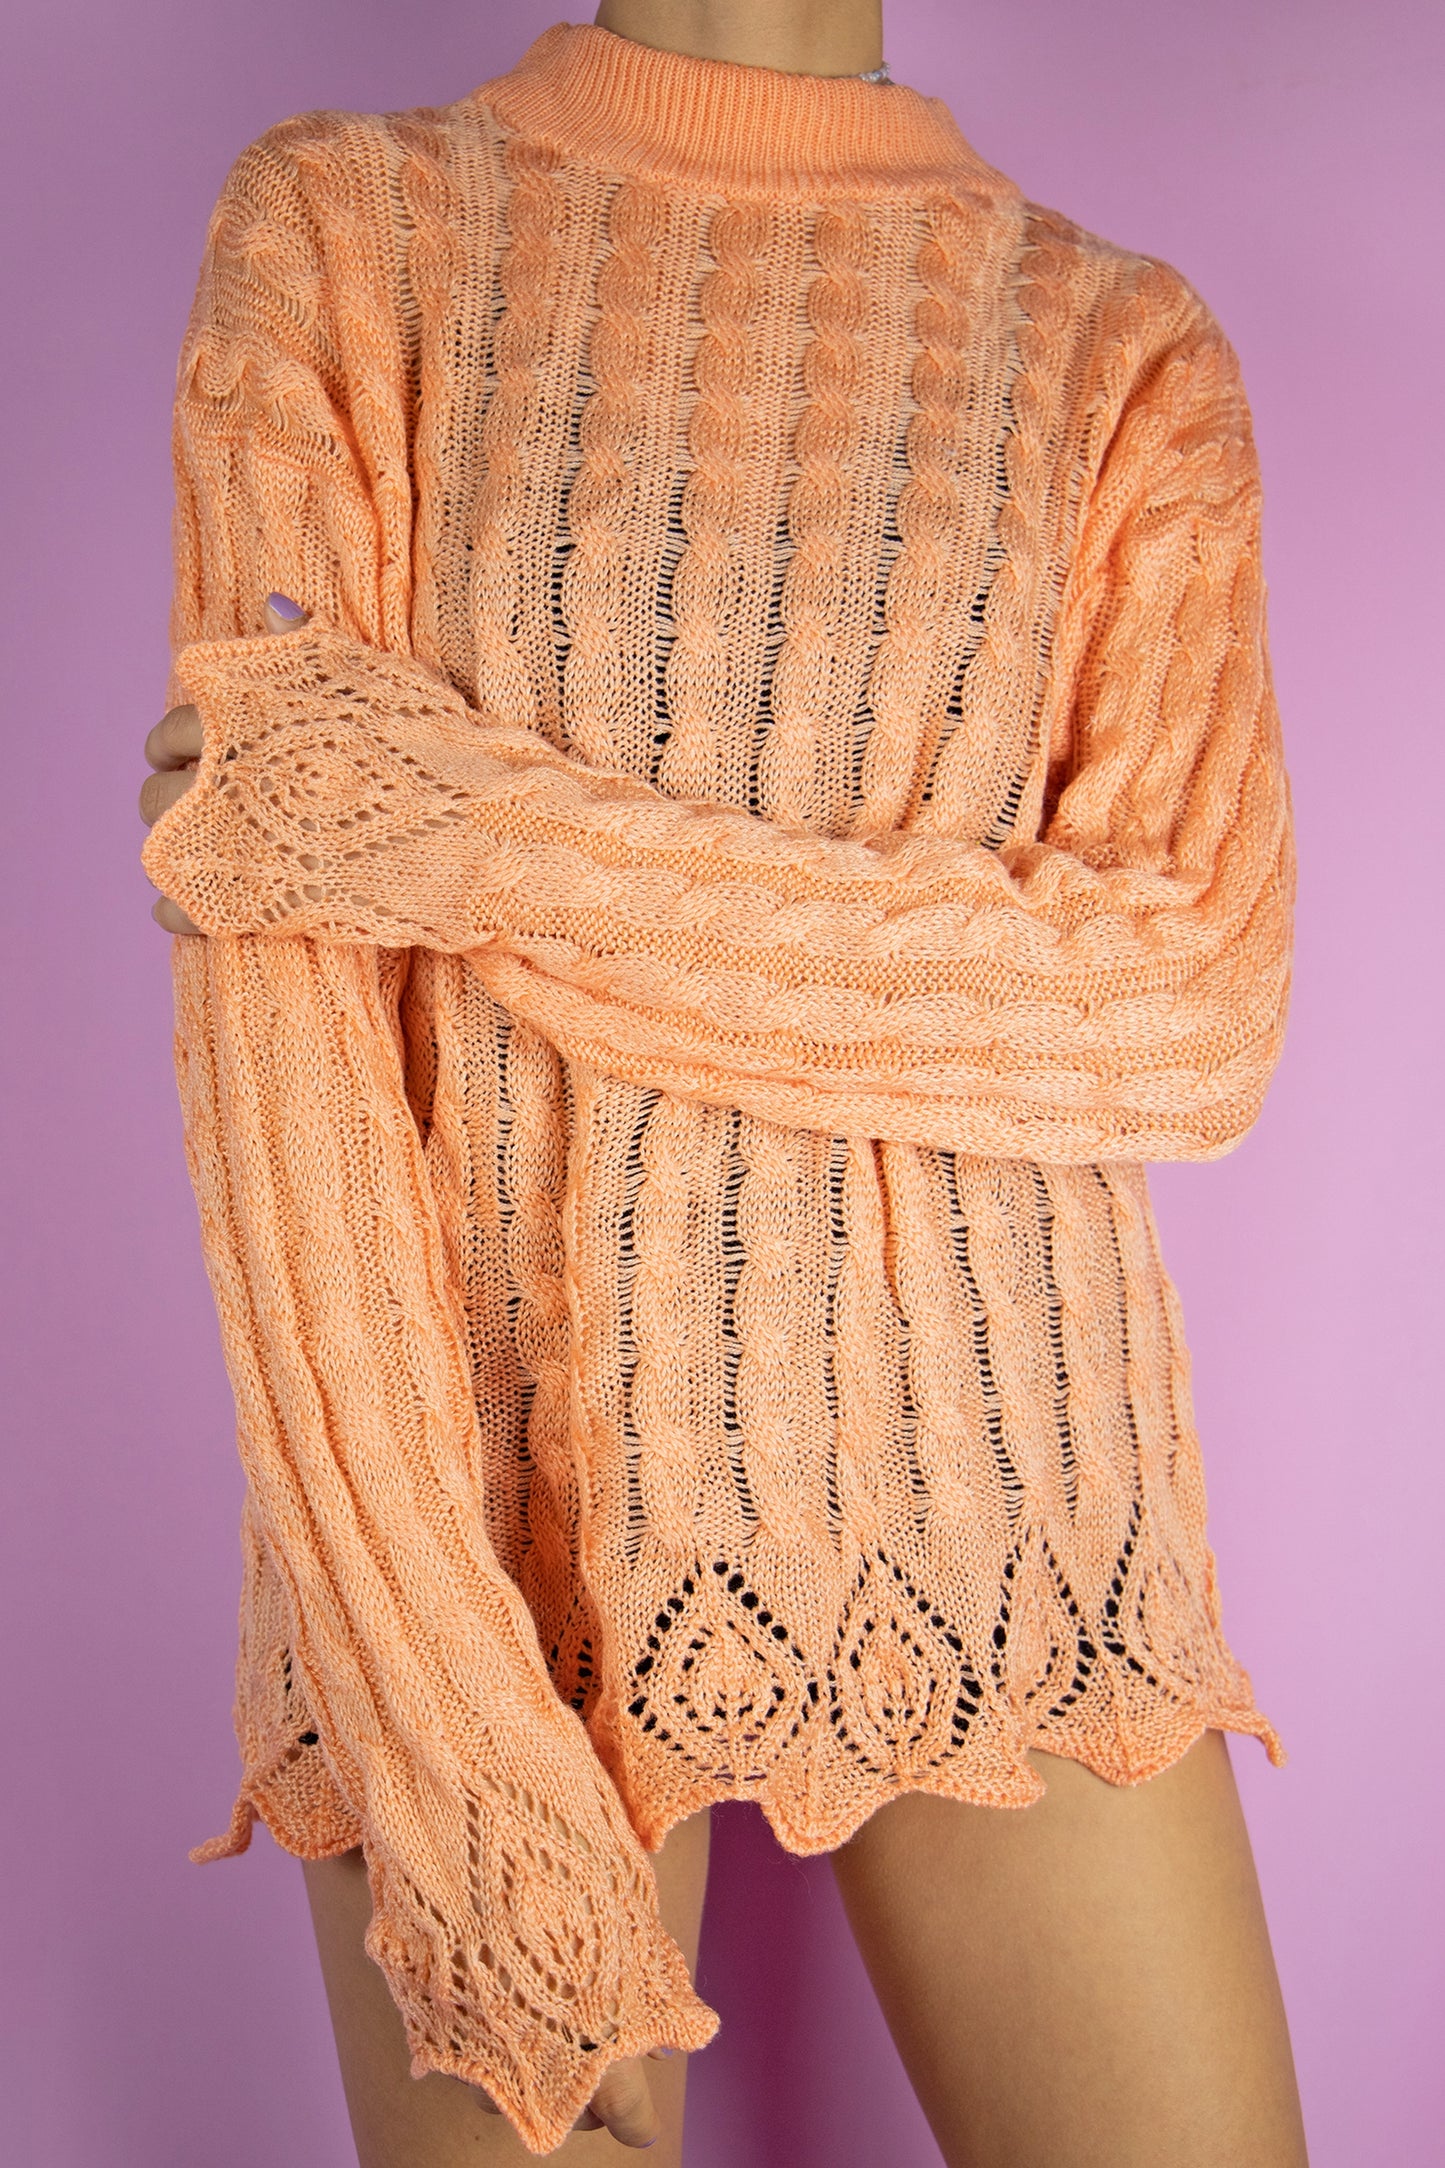 The Vintage 80’s Orange Cable Knit Sweater is a delightful pastel orange crocheted turtleneck sweater. Achieve a super cute oversized look with this lovely boho fairy grunge jumper from the 1980s.